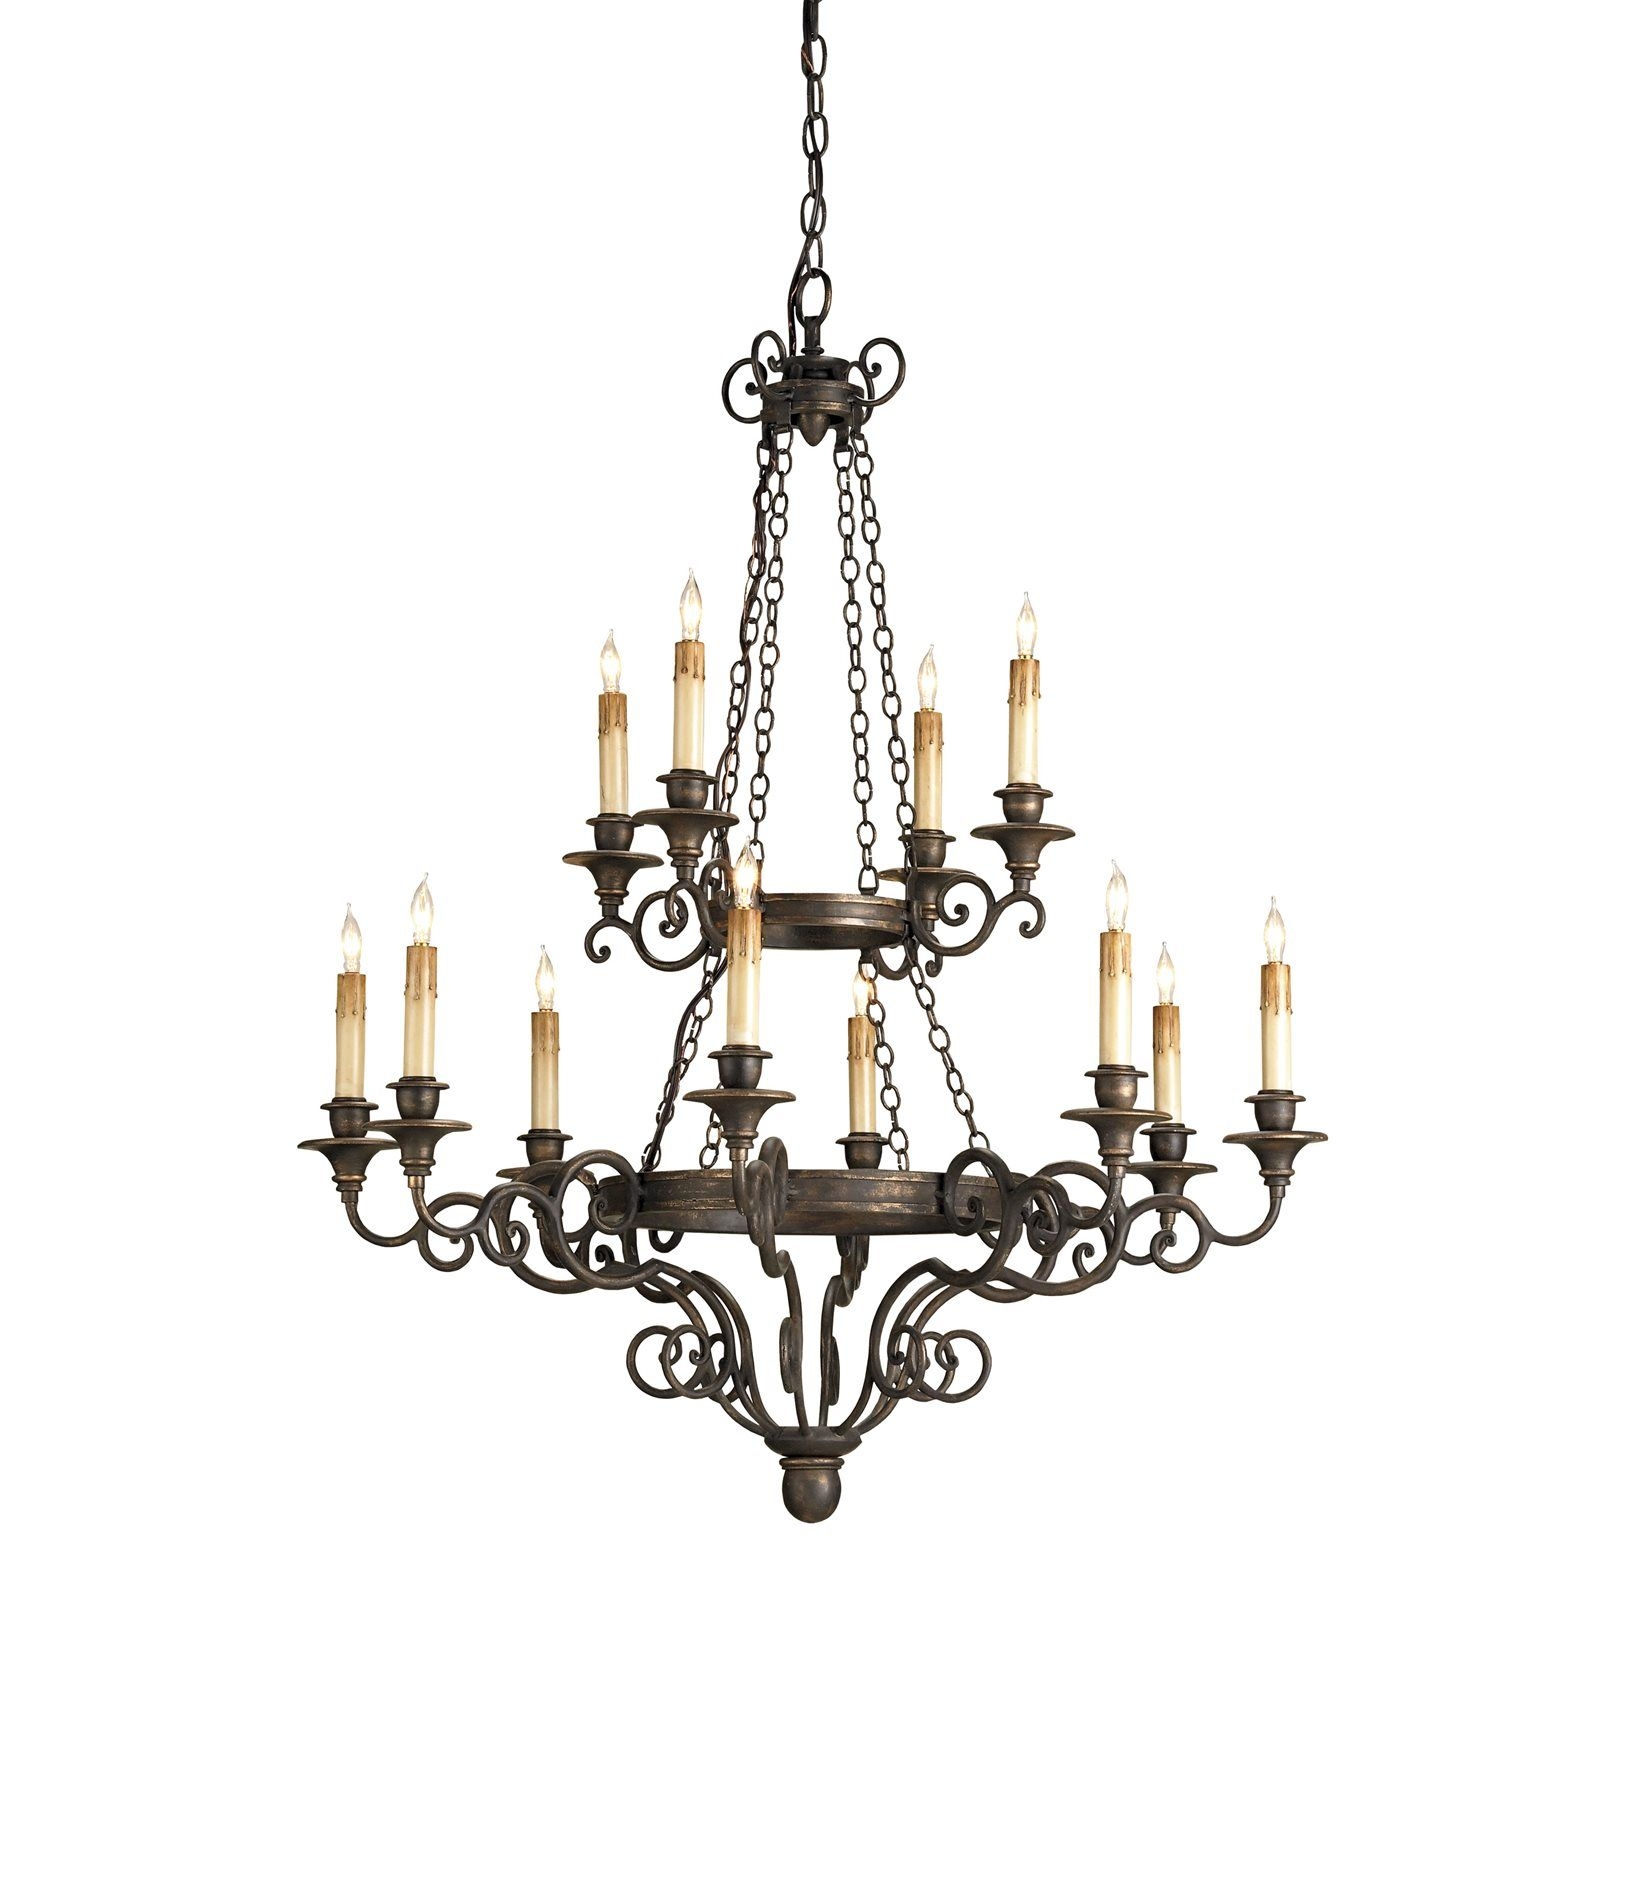 Wrought_iron_candle_chandelier_wrought_iron_outdoor_candle_chandelier